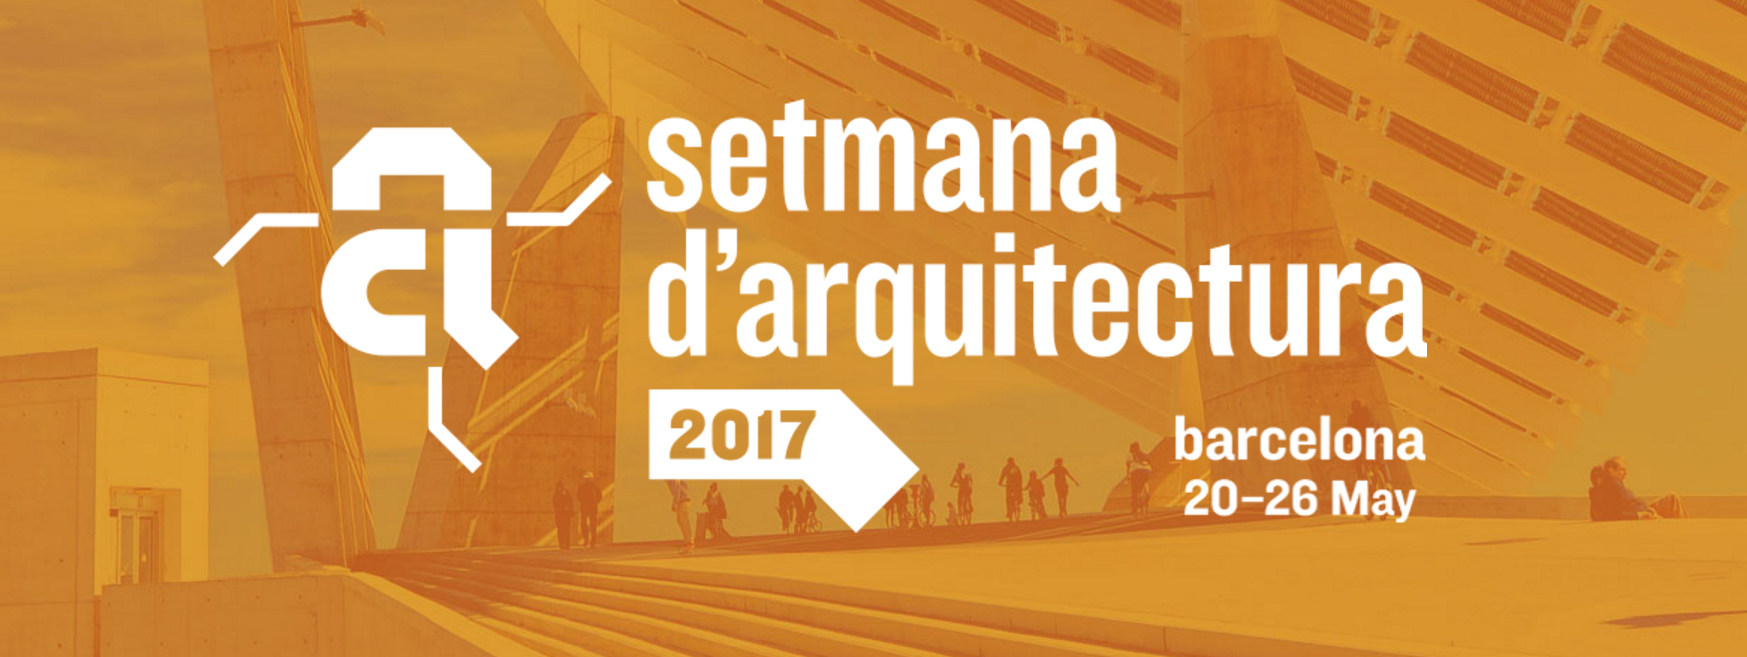 Our Master program featured in Barcelona’s 2017 Architecture Week